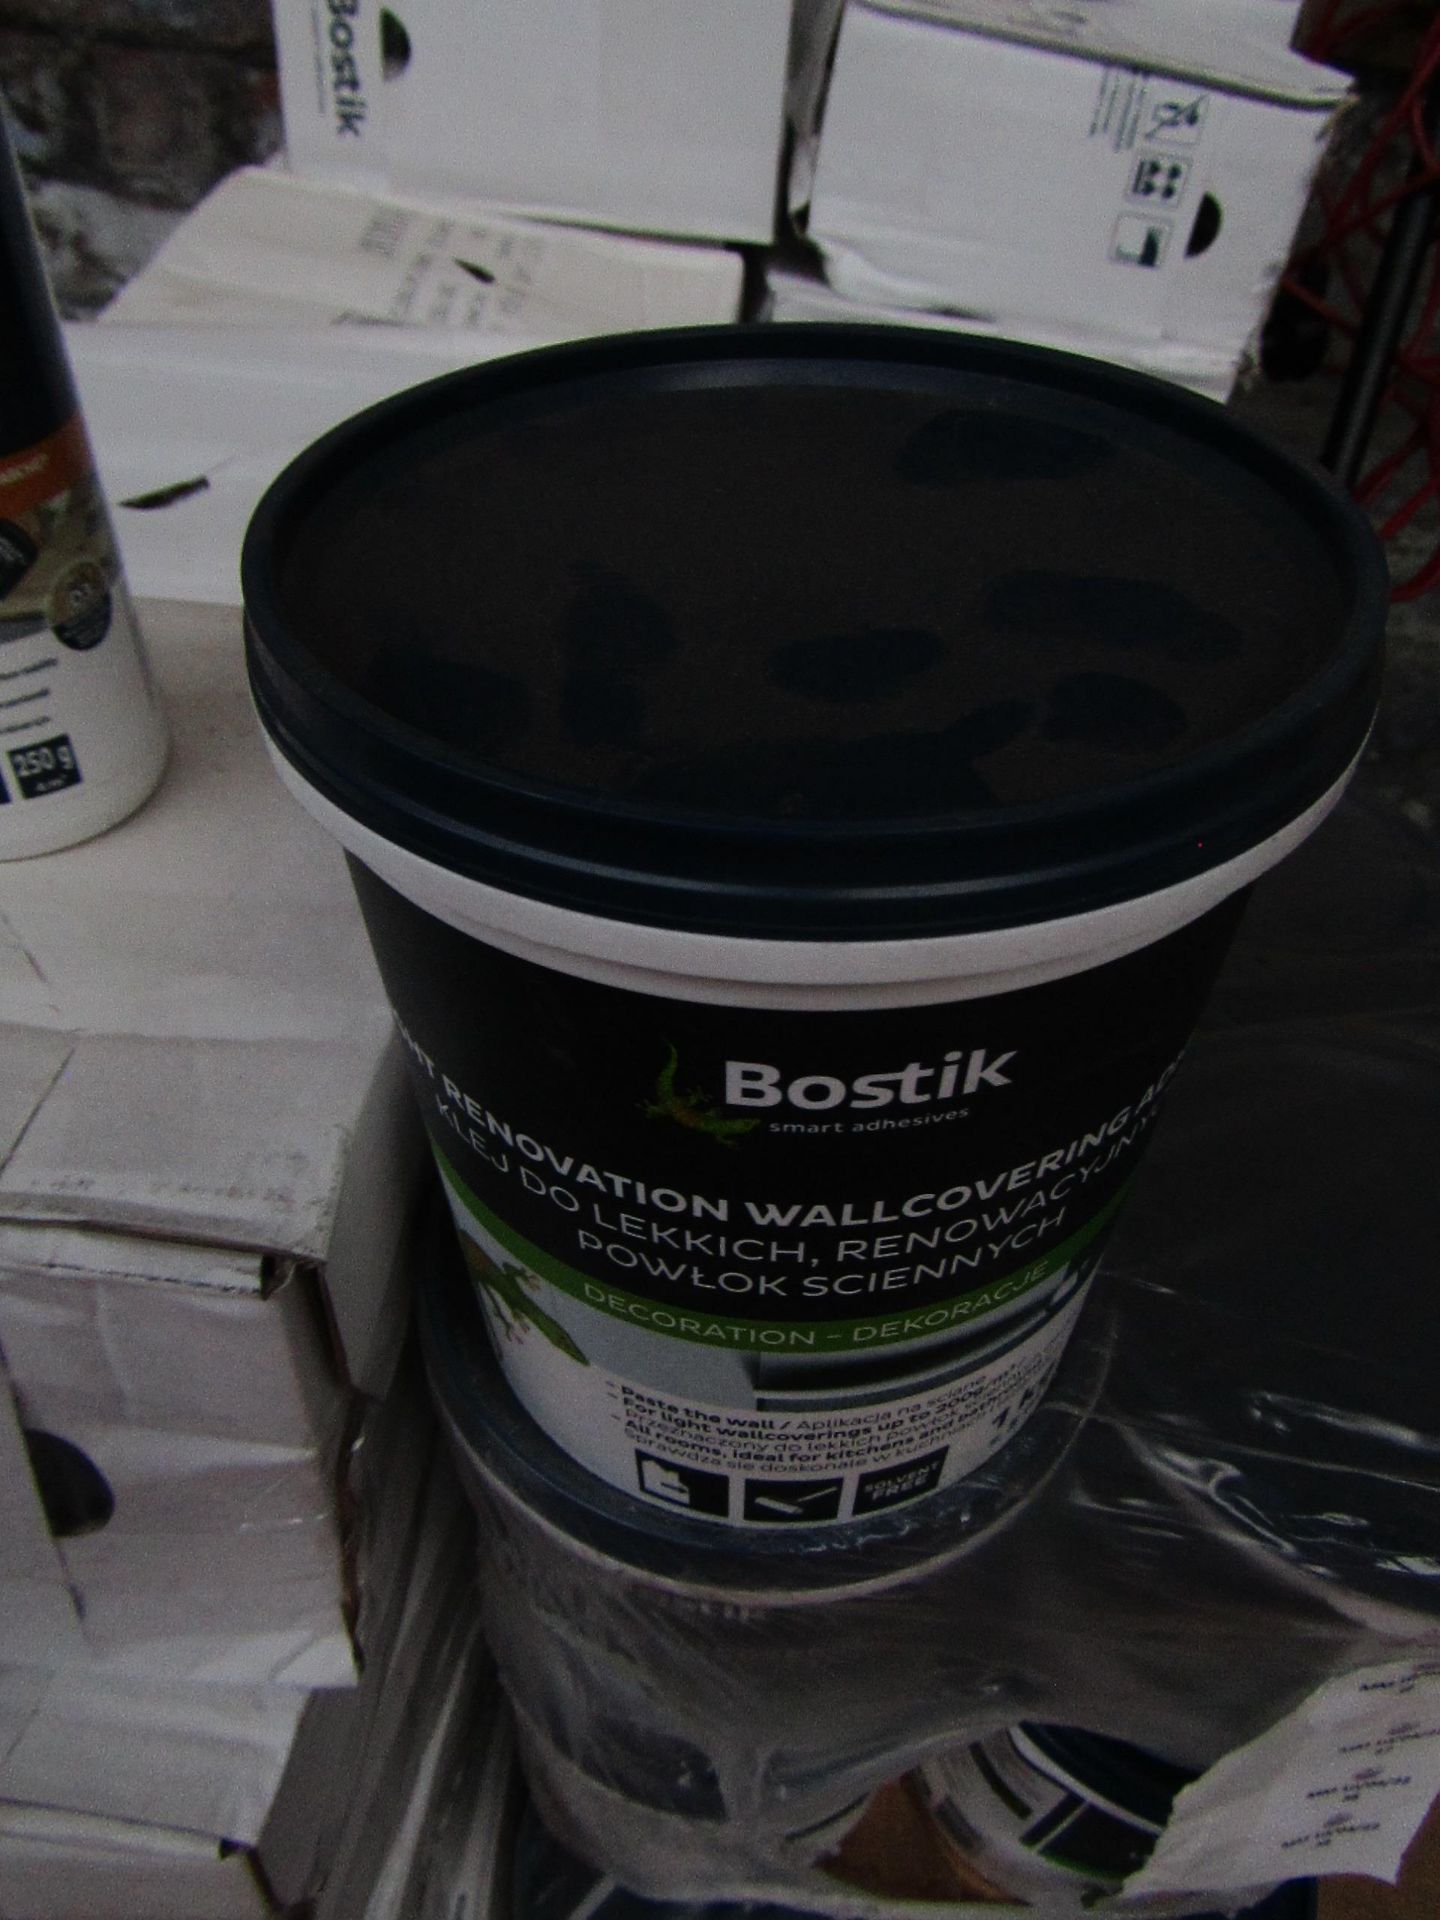 6x 1kg tubs Bostik Solvent free wall covering adhesive, still sealed